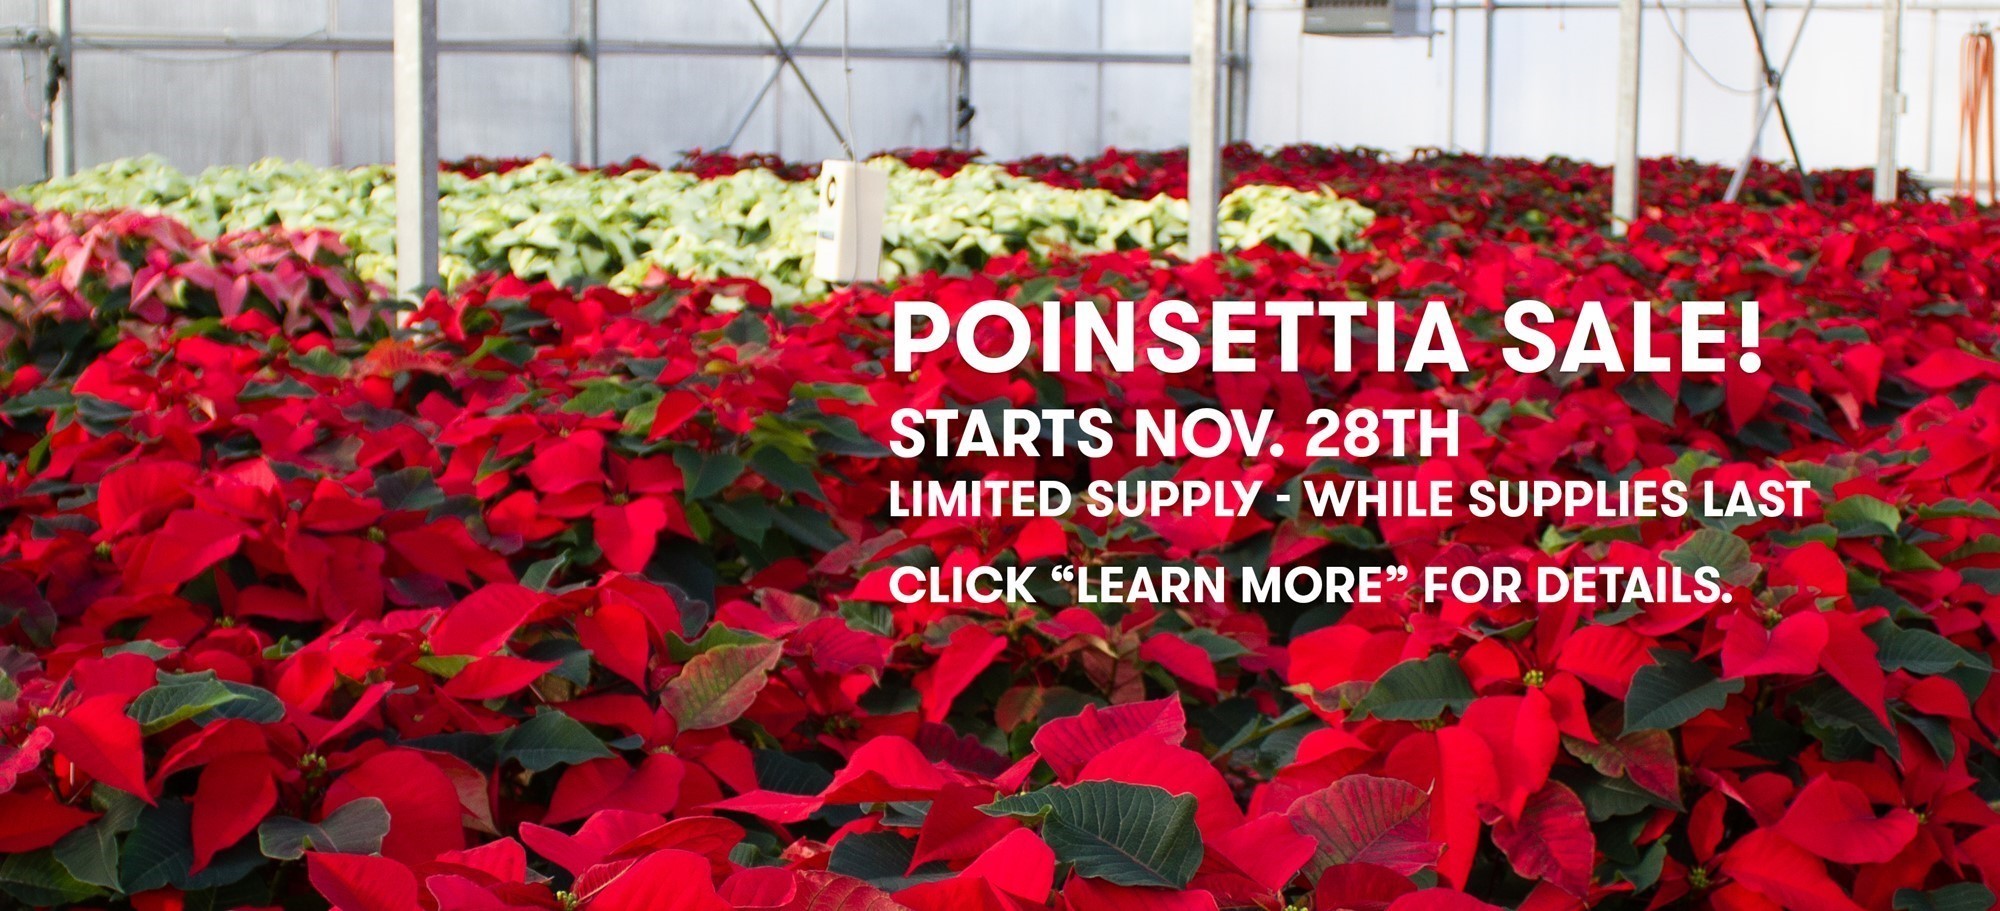 Poinsettias in red and white